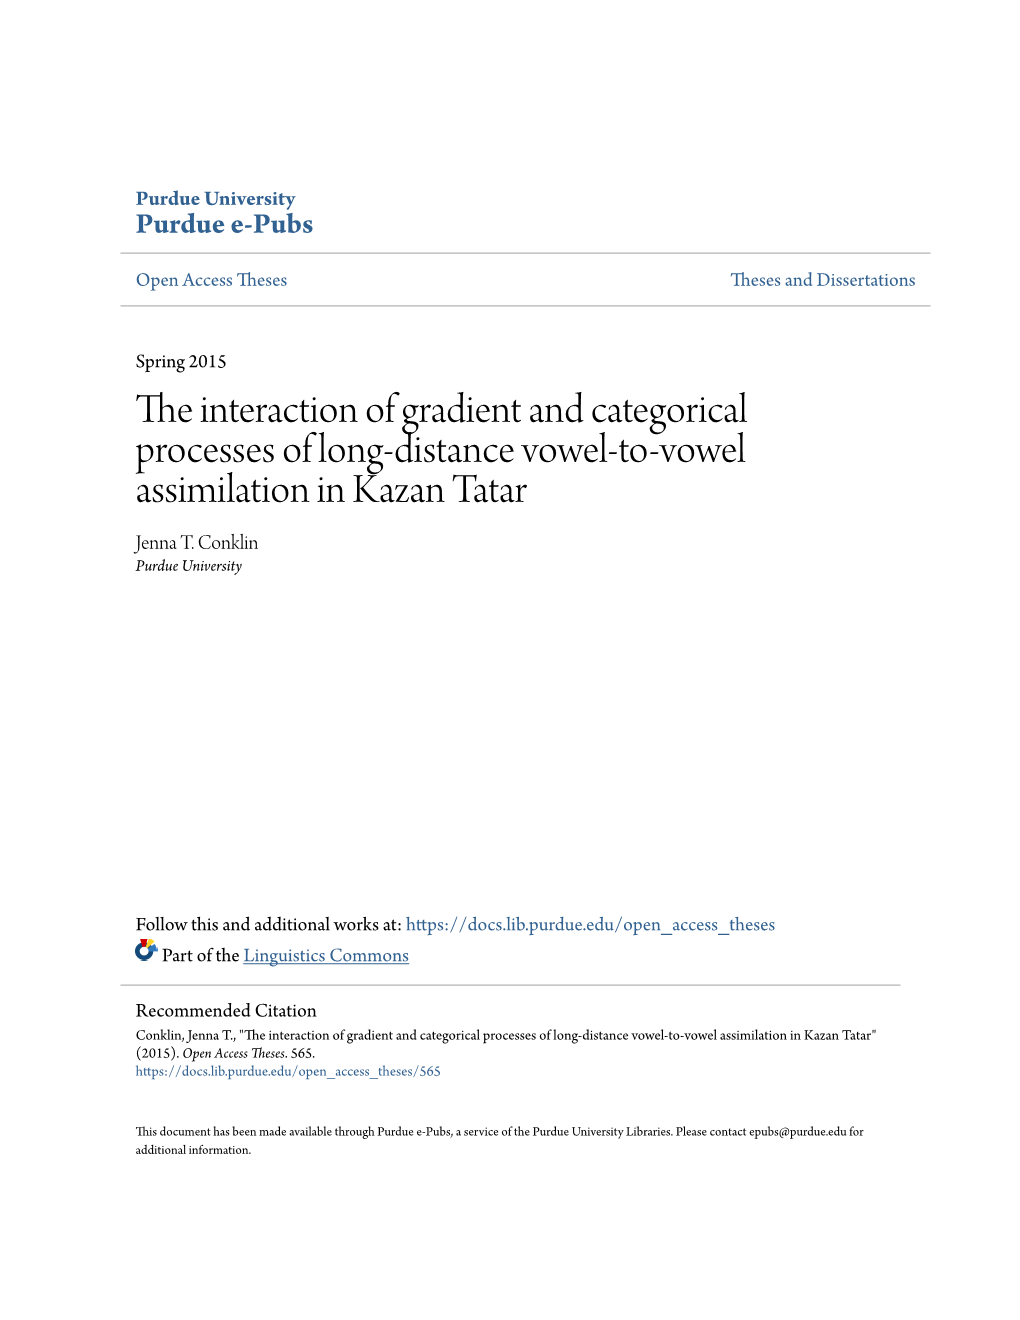 The Interaction of Gradient and Categorical Processes of Long-Distance Vowel-To-Vowel Assimilation in Kazan Tatar Jenna T